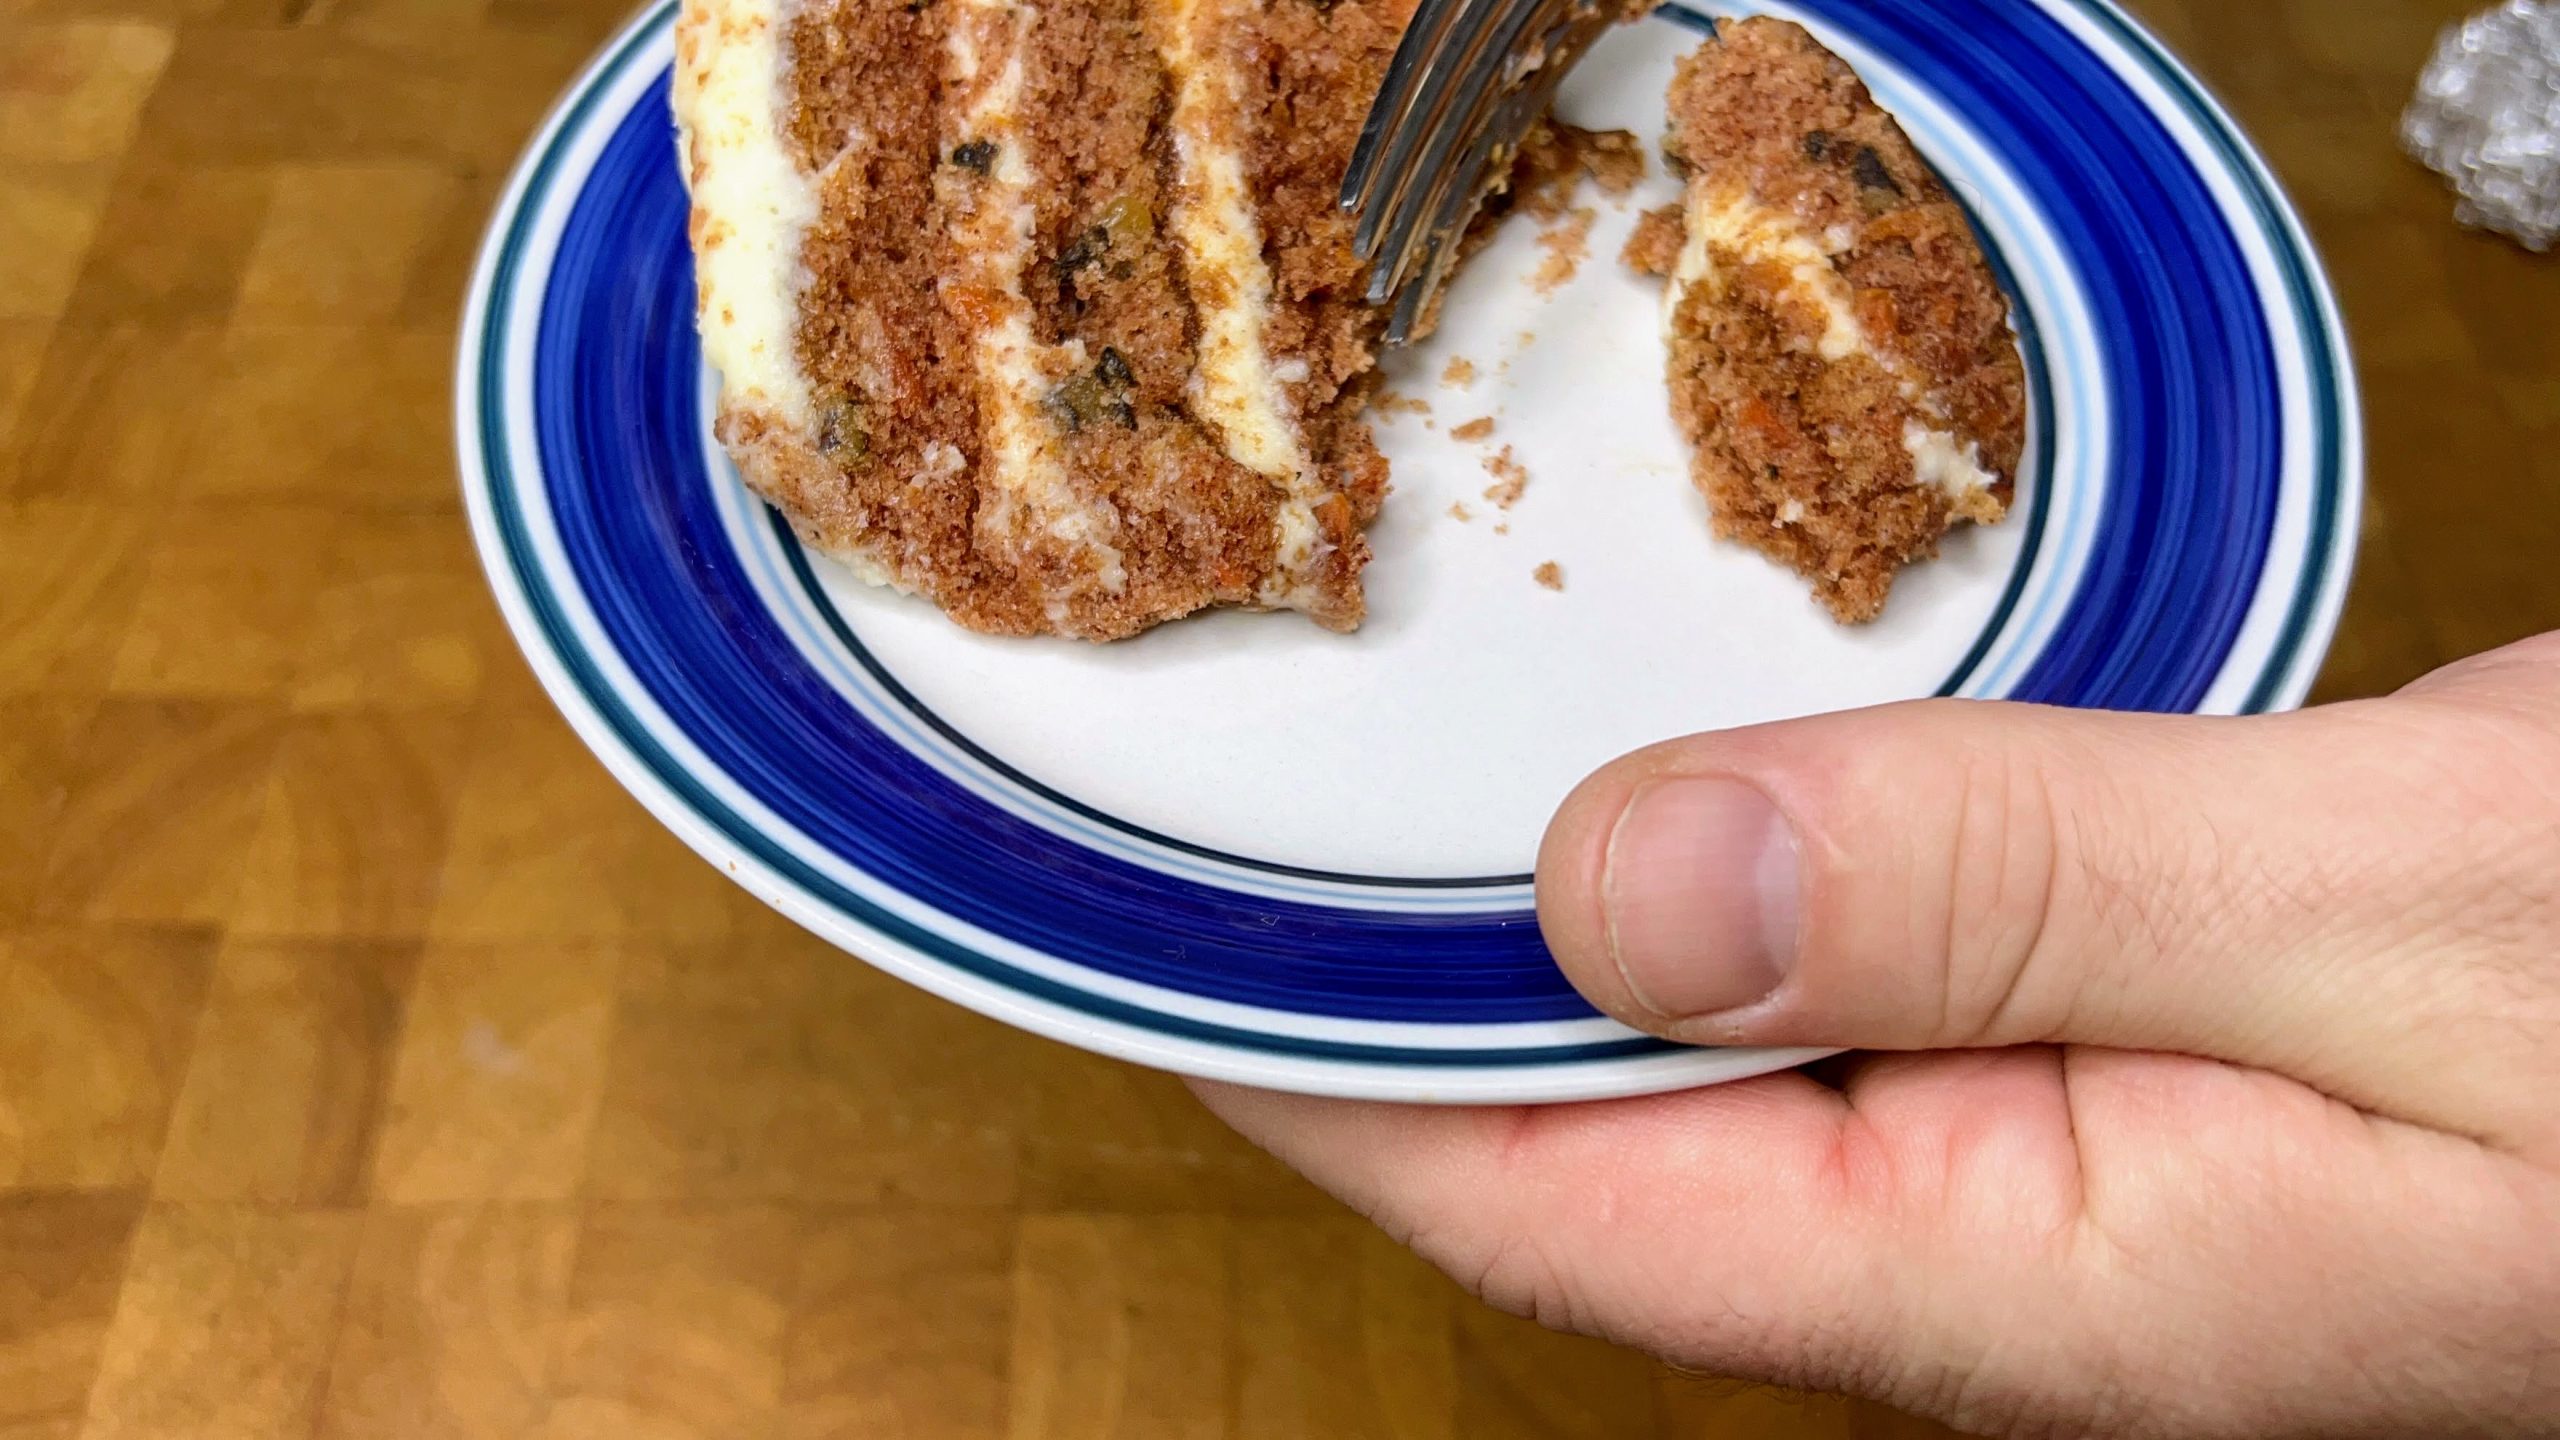 defrosted slice of carrot cake with a bite cut out.